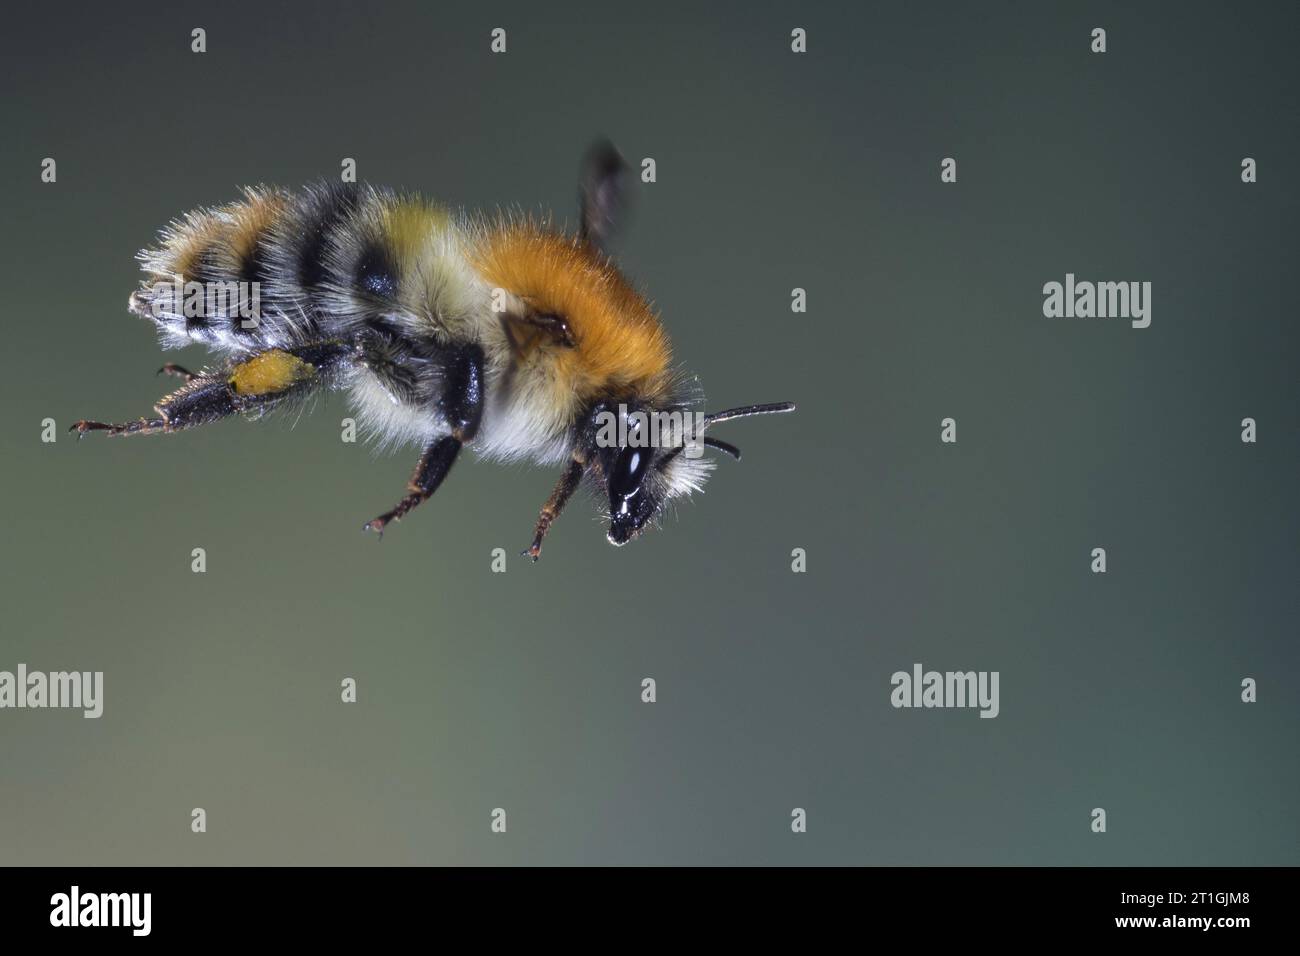 Abeja carder, abeja carder común (Bombus pascuorum, Bombus agrorum, Megabombus pascuorum), en vuelo, vista lateral, Alemania Foto de stock